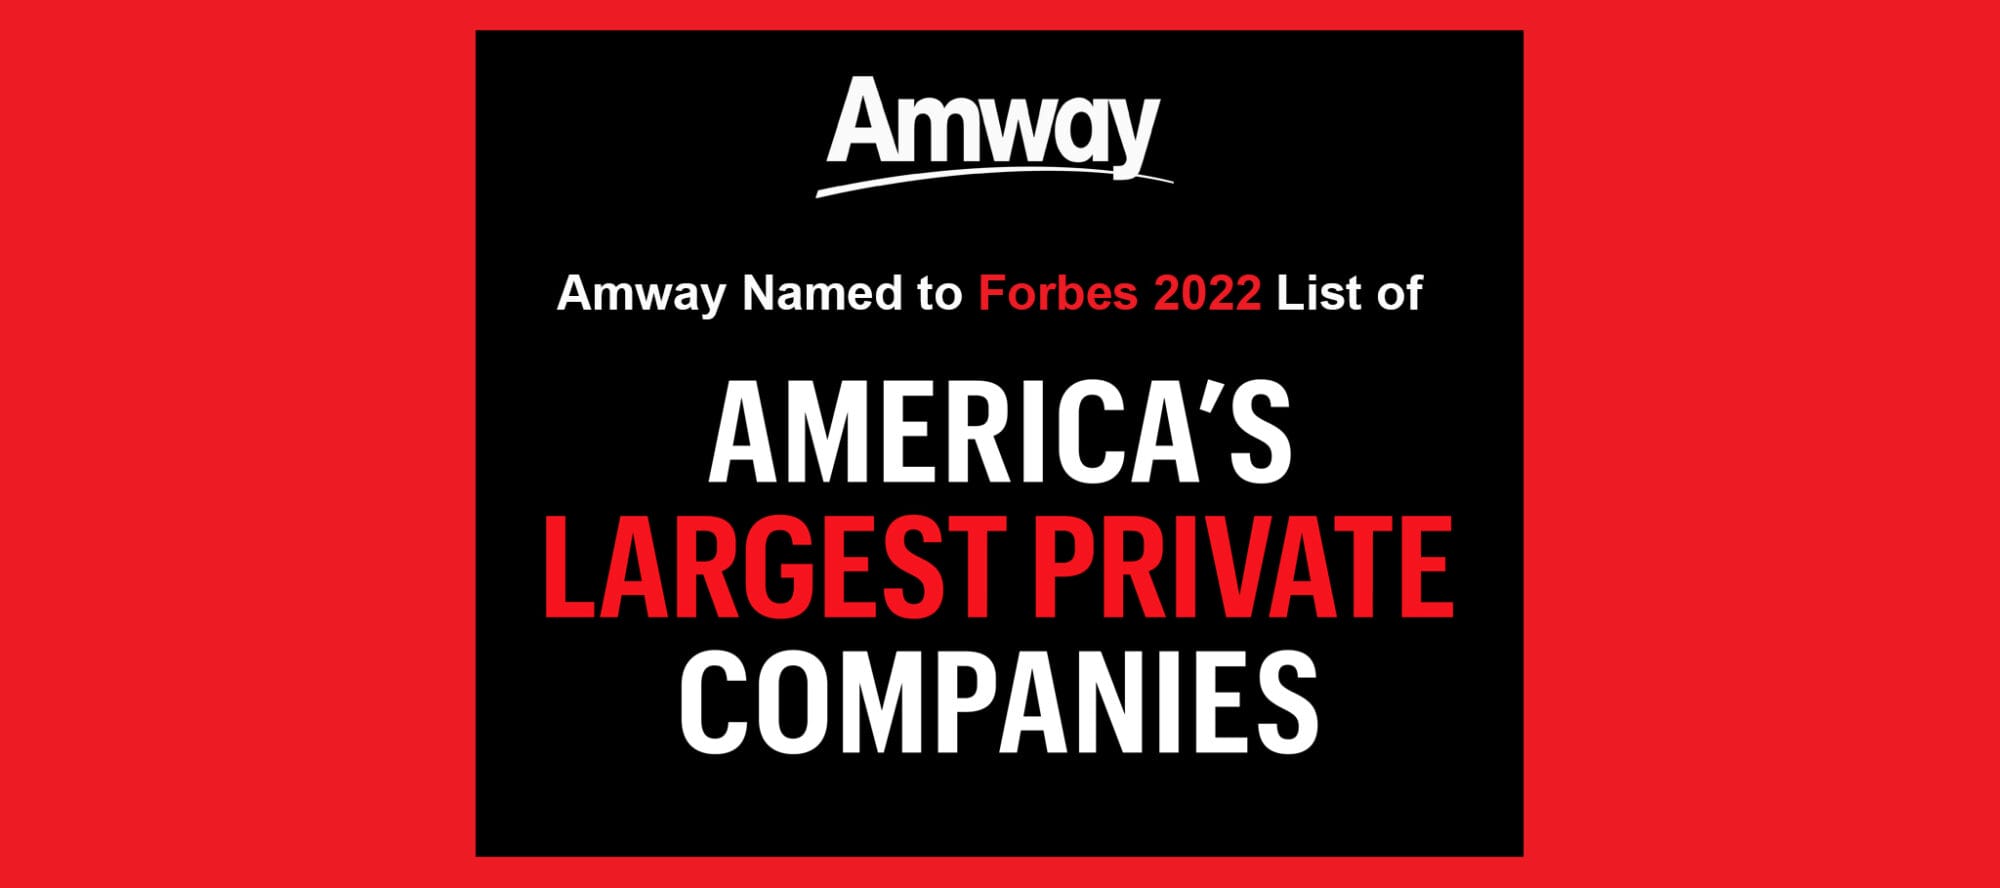 Amway named to Forbes 2022 list of America's Largest Private Companies